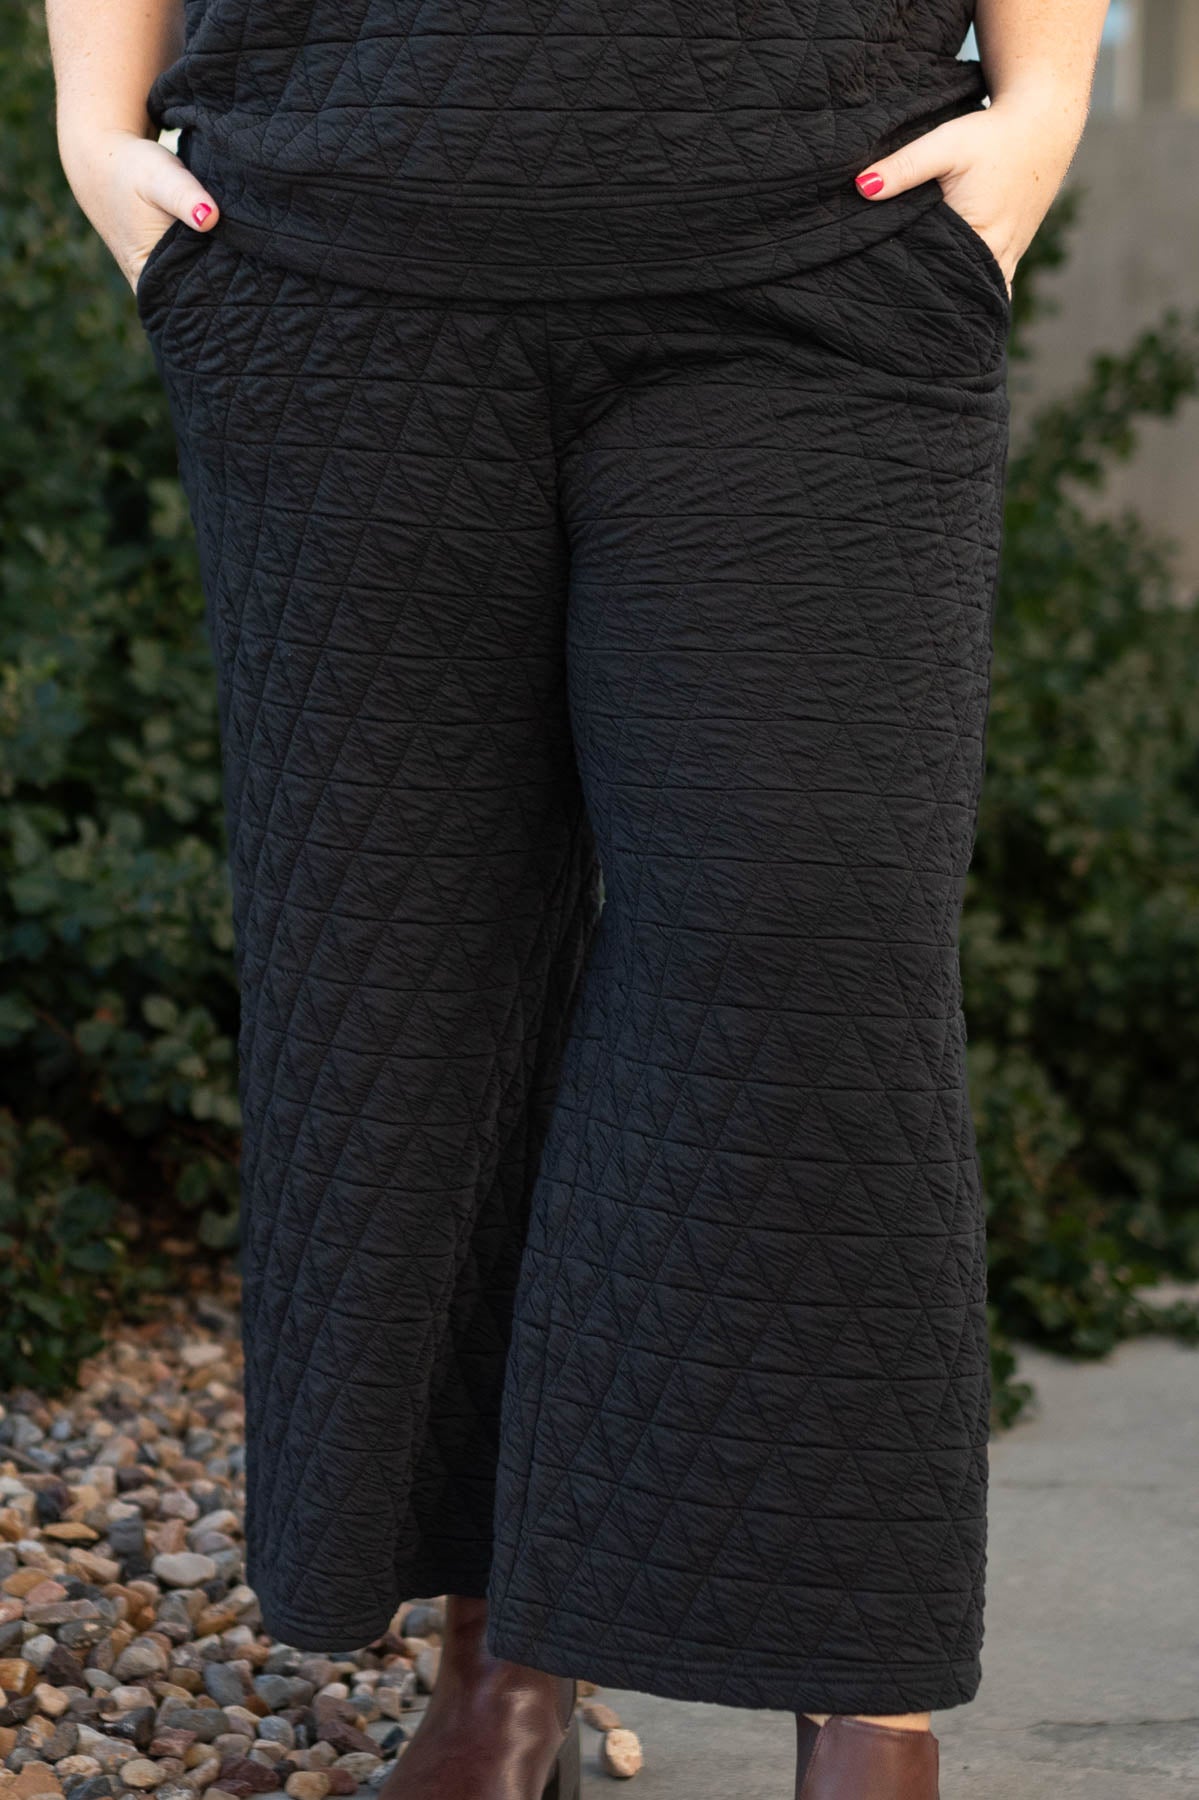 Plus size quilted black pants